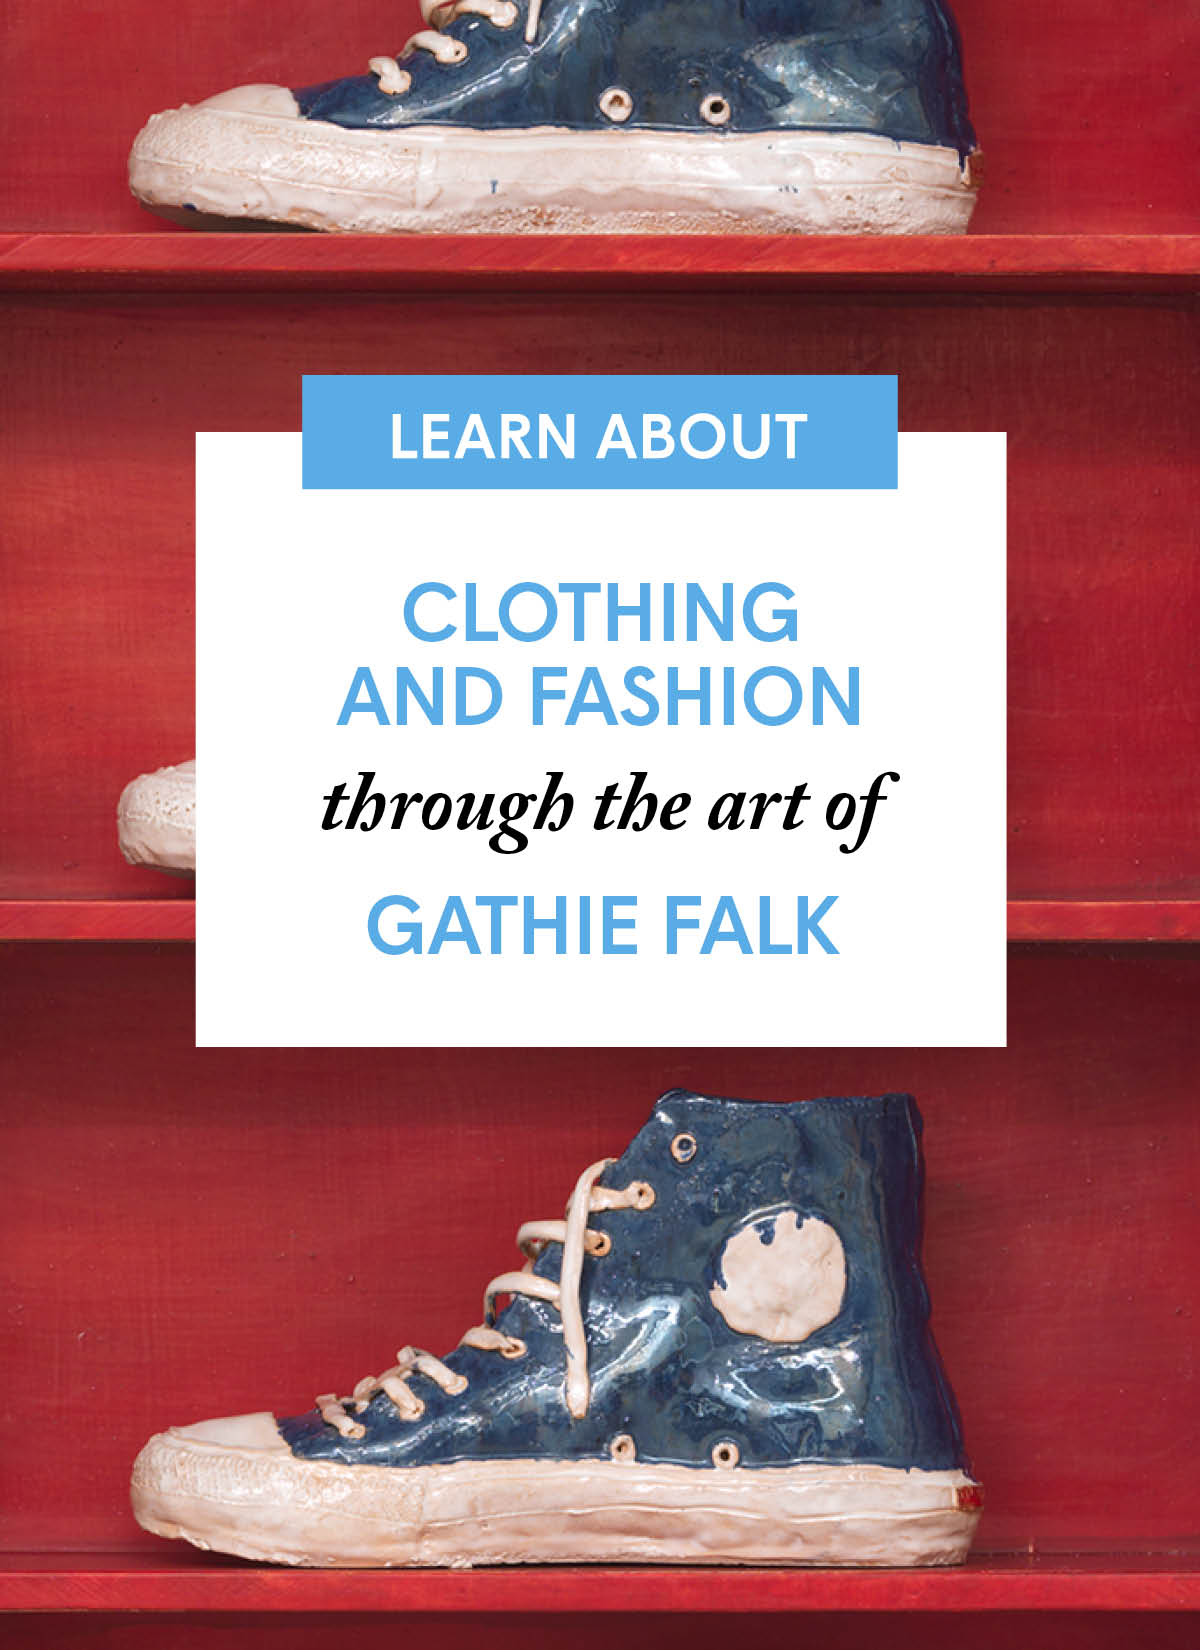 Learn About Clothing and Fashion Through the Art of Gathie Falk